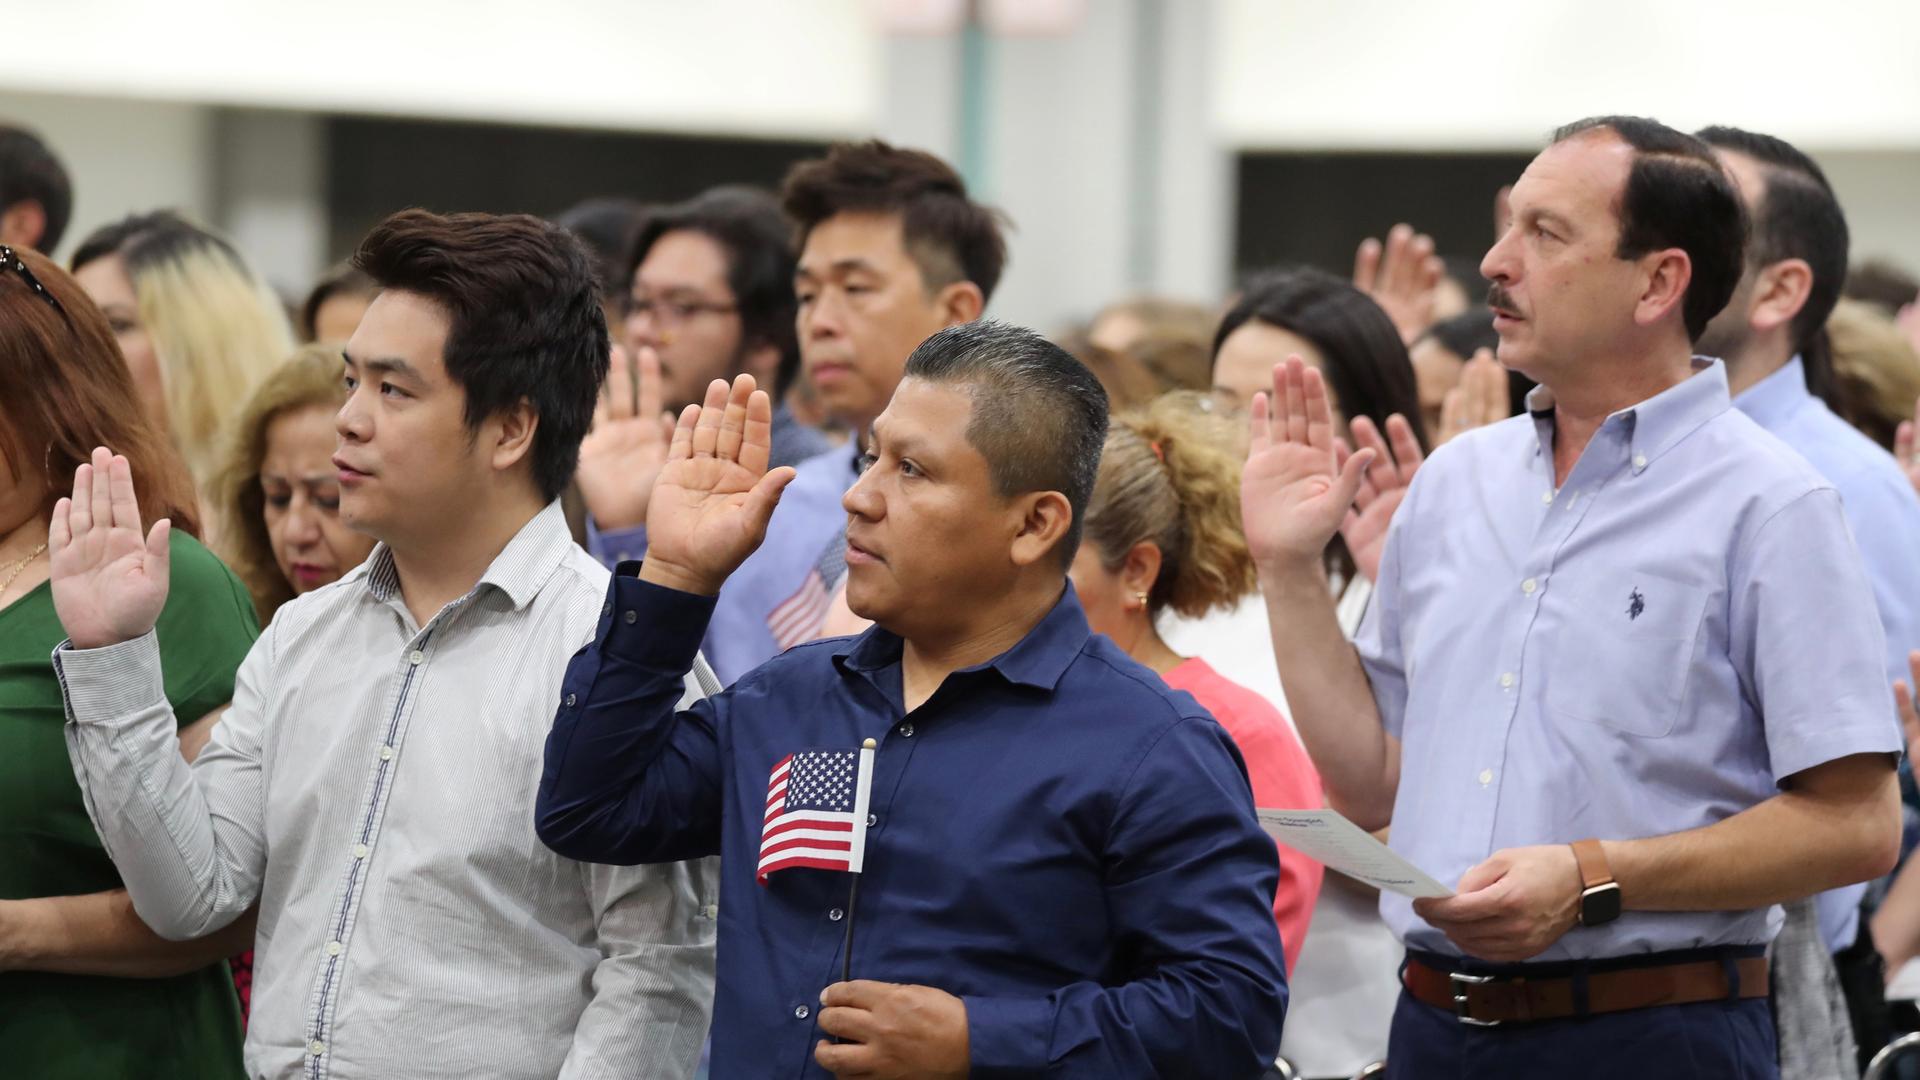 Immigrants are sworn in as new US citizens at a naturalization ceremony in Los Angeles, Aug. 22, 2019.